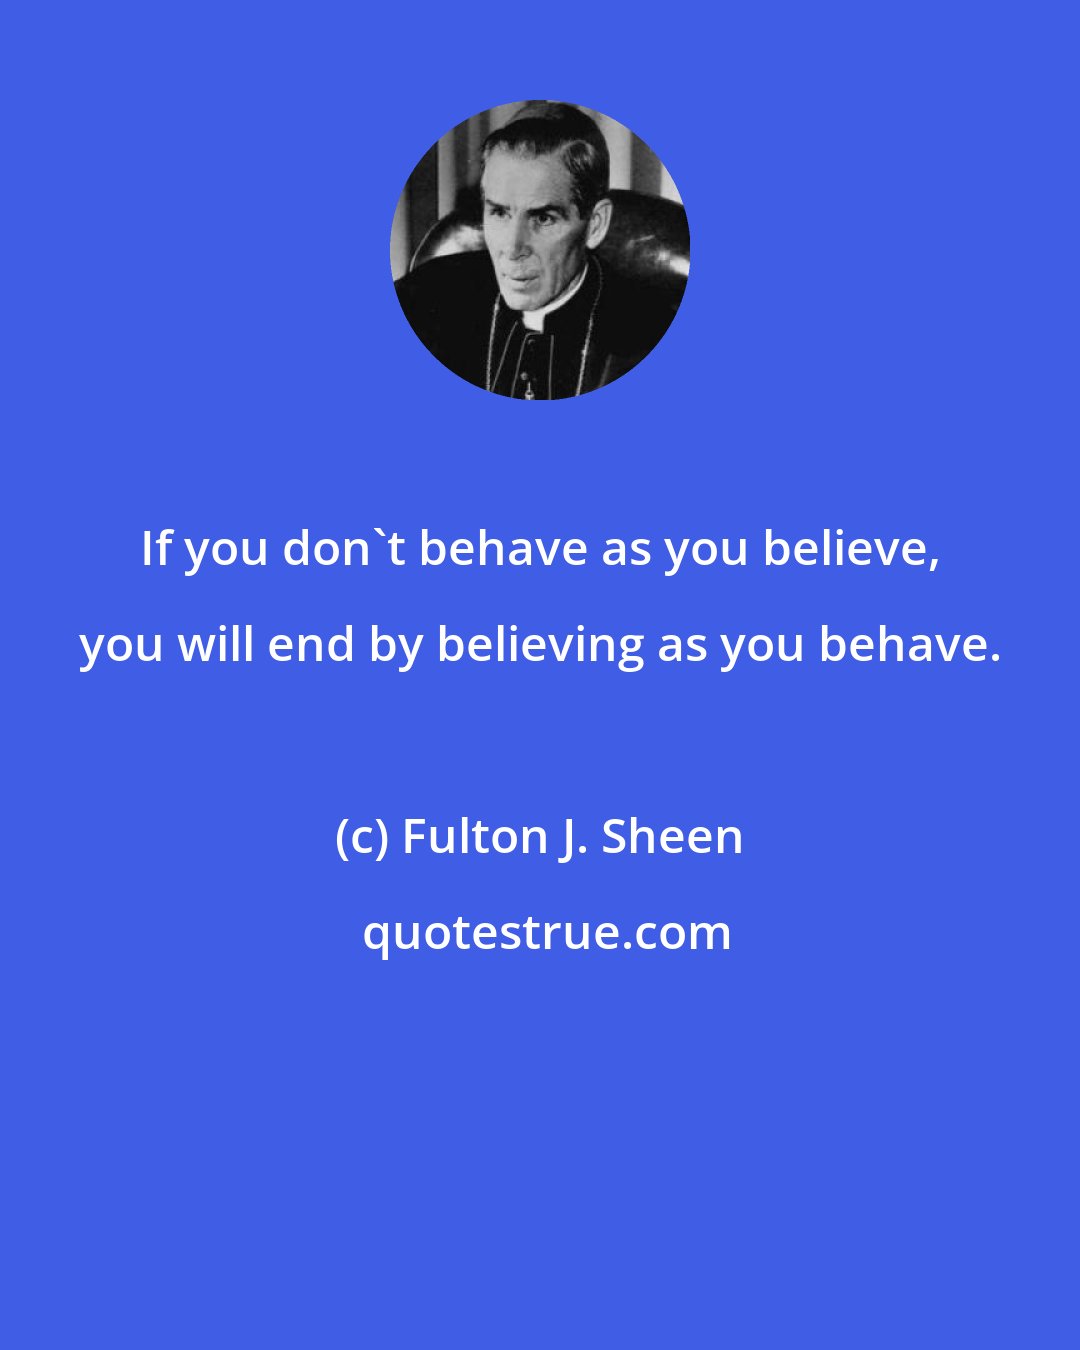 Fulton J. Sheen: If you don't behave as you believe, you will end by believing as you behave.